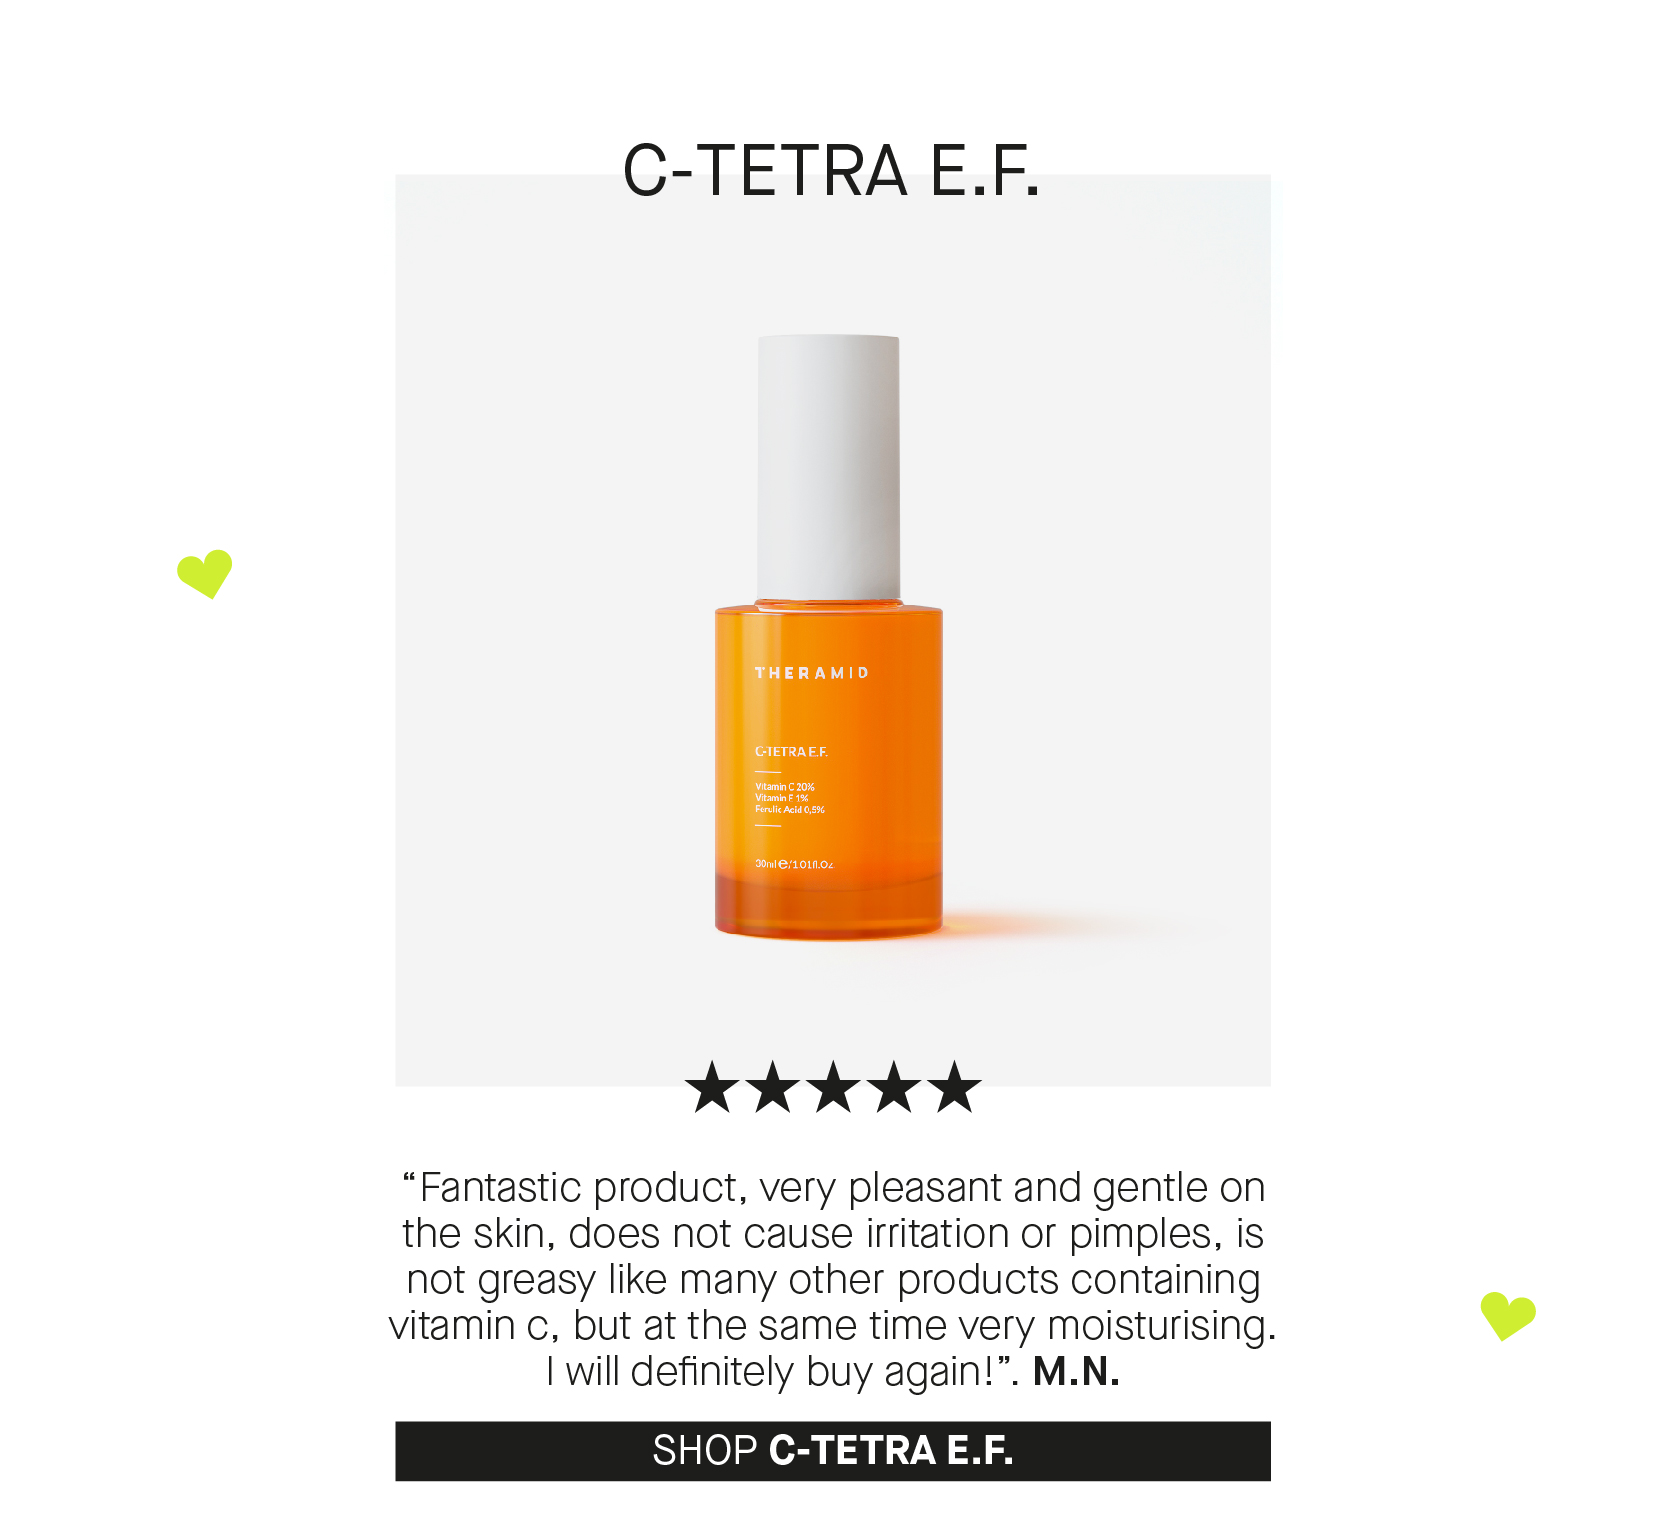 C-TETRA E.F. UL RN YR 1Y 1.0.0. 0.8 Fantastic product, very pleasant and gentle on the skin, does not cause irritation or pimples, is not greasy like many other products containing vitamin , but at the same time very moisturising. I will definitely buy again!. M.N. SHOP C-TETRAE.F. 